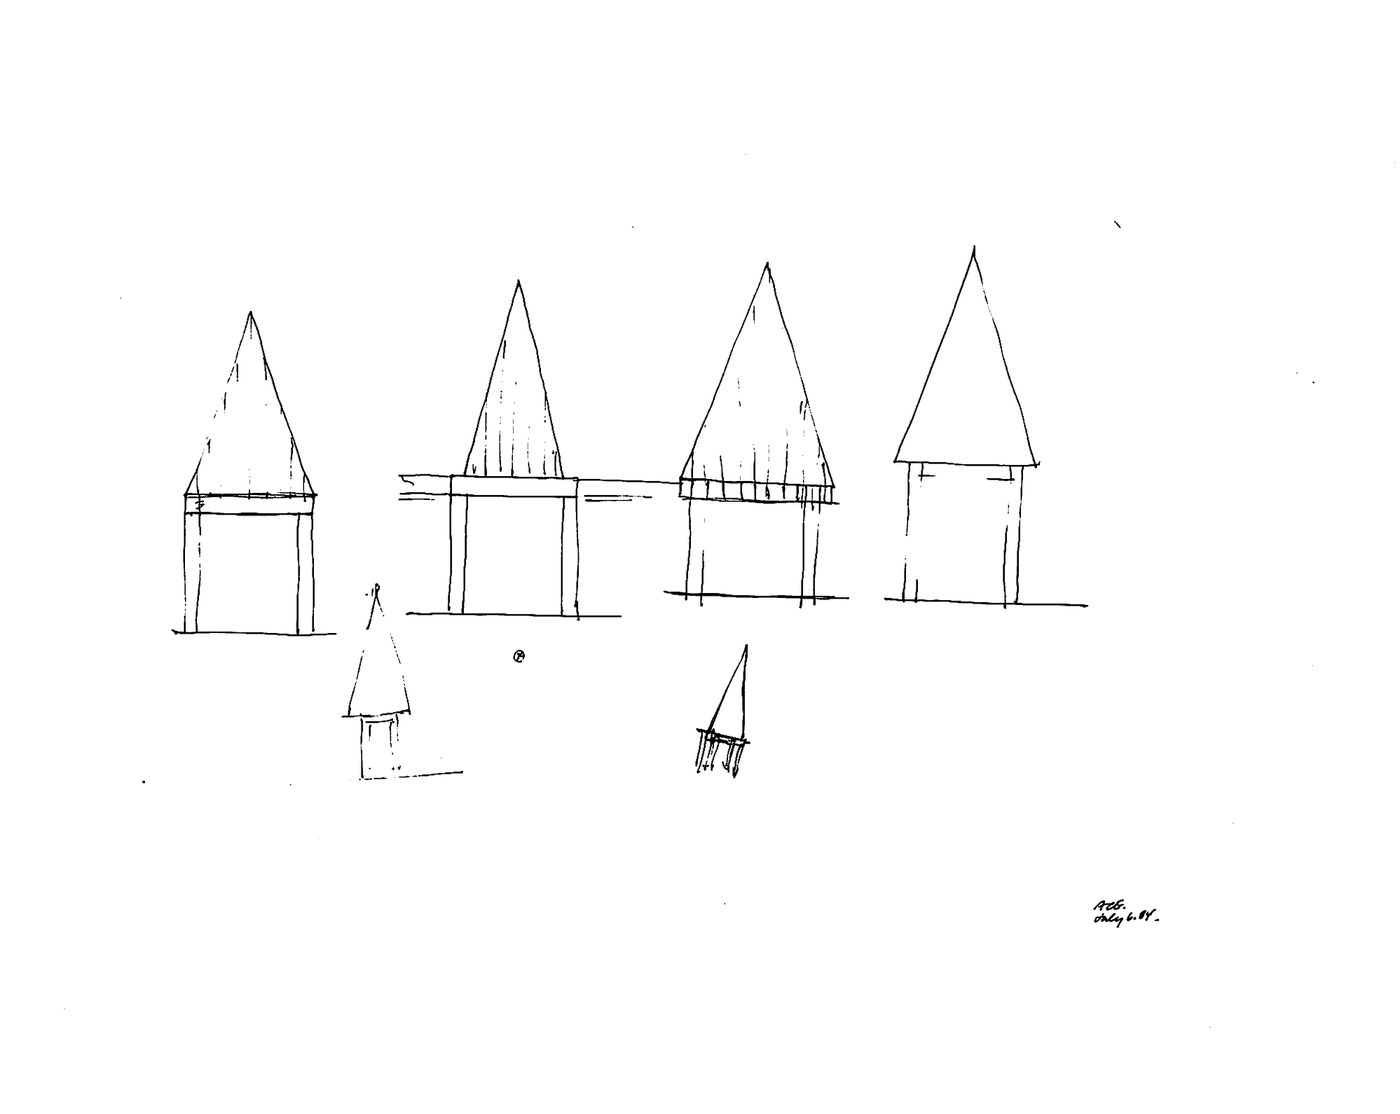 Russell House, Lake Bay, Washington (also called " Puget Sound House "): Sketches of alternative elevations